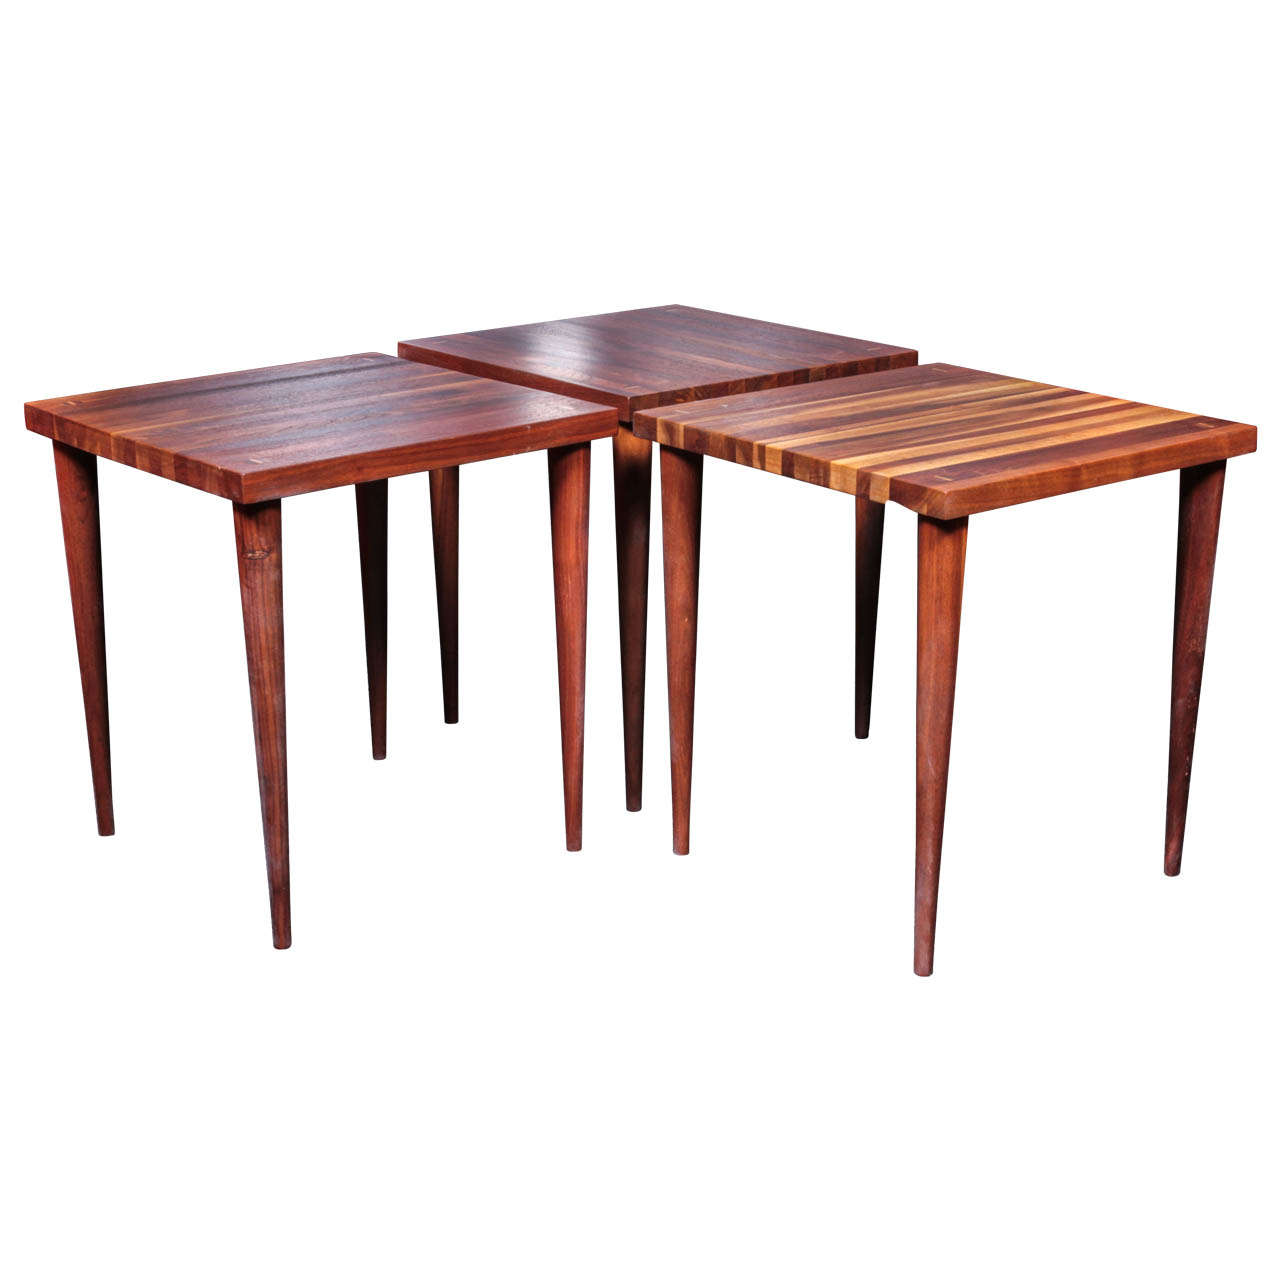 Set of 3 Solid Vintage Walnut Stacking Tables by Mel Smilow